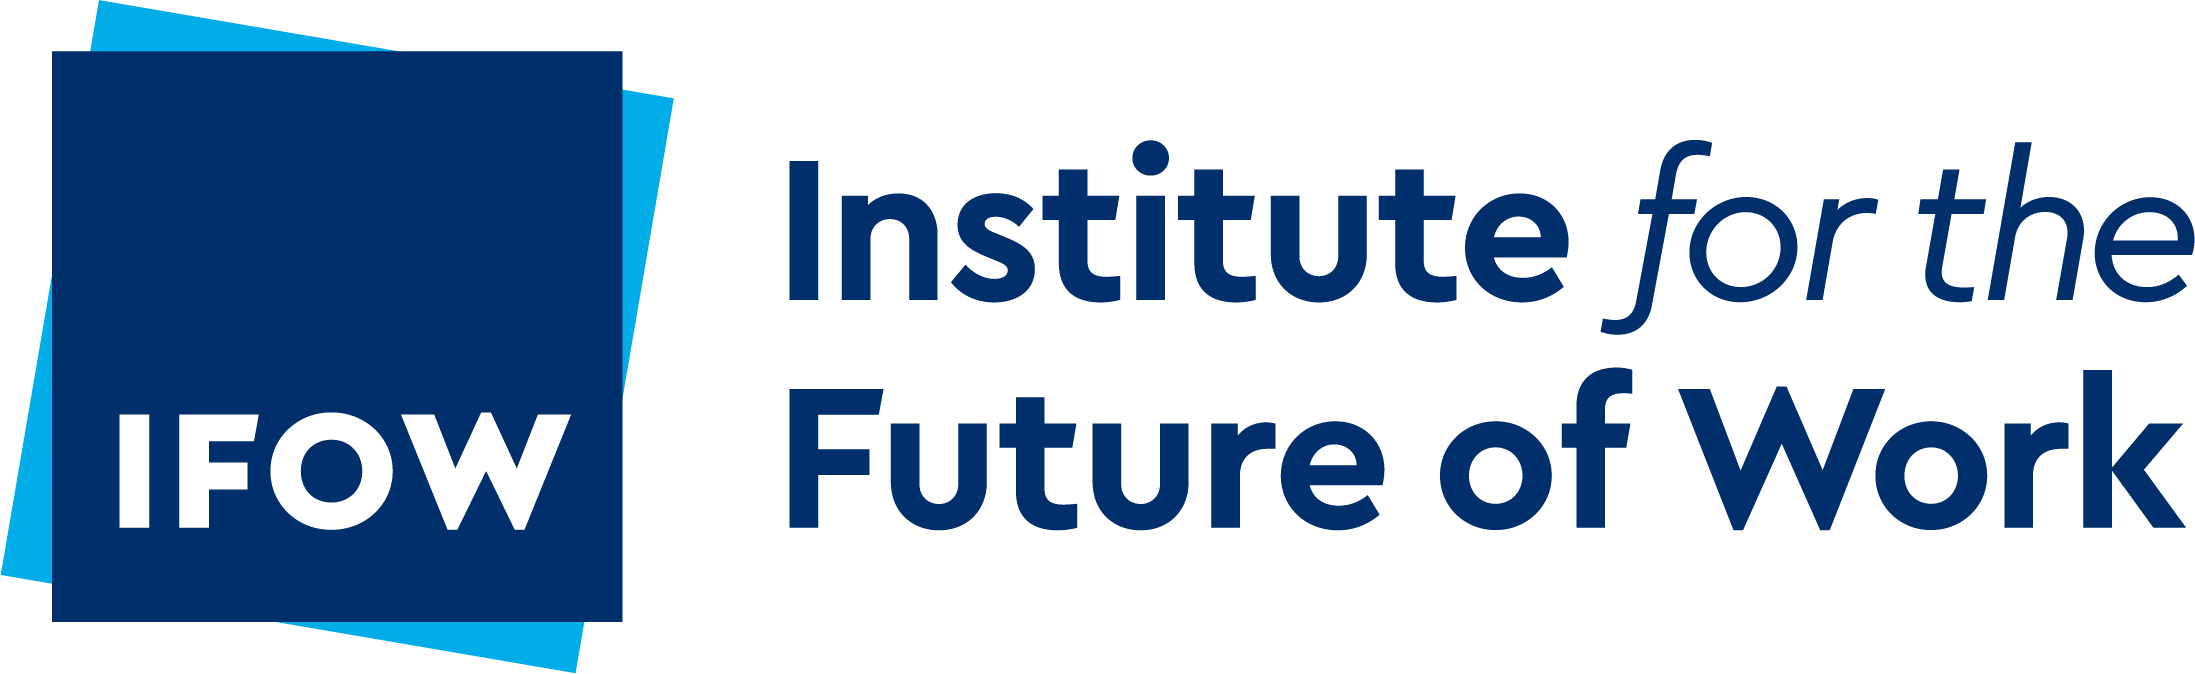 The Institute for the Future of Work